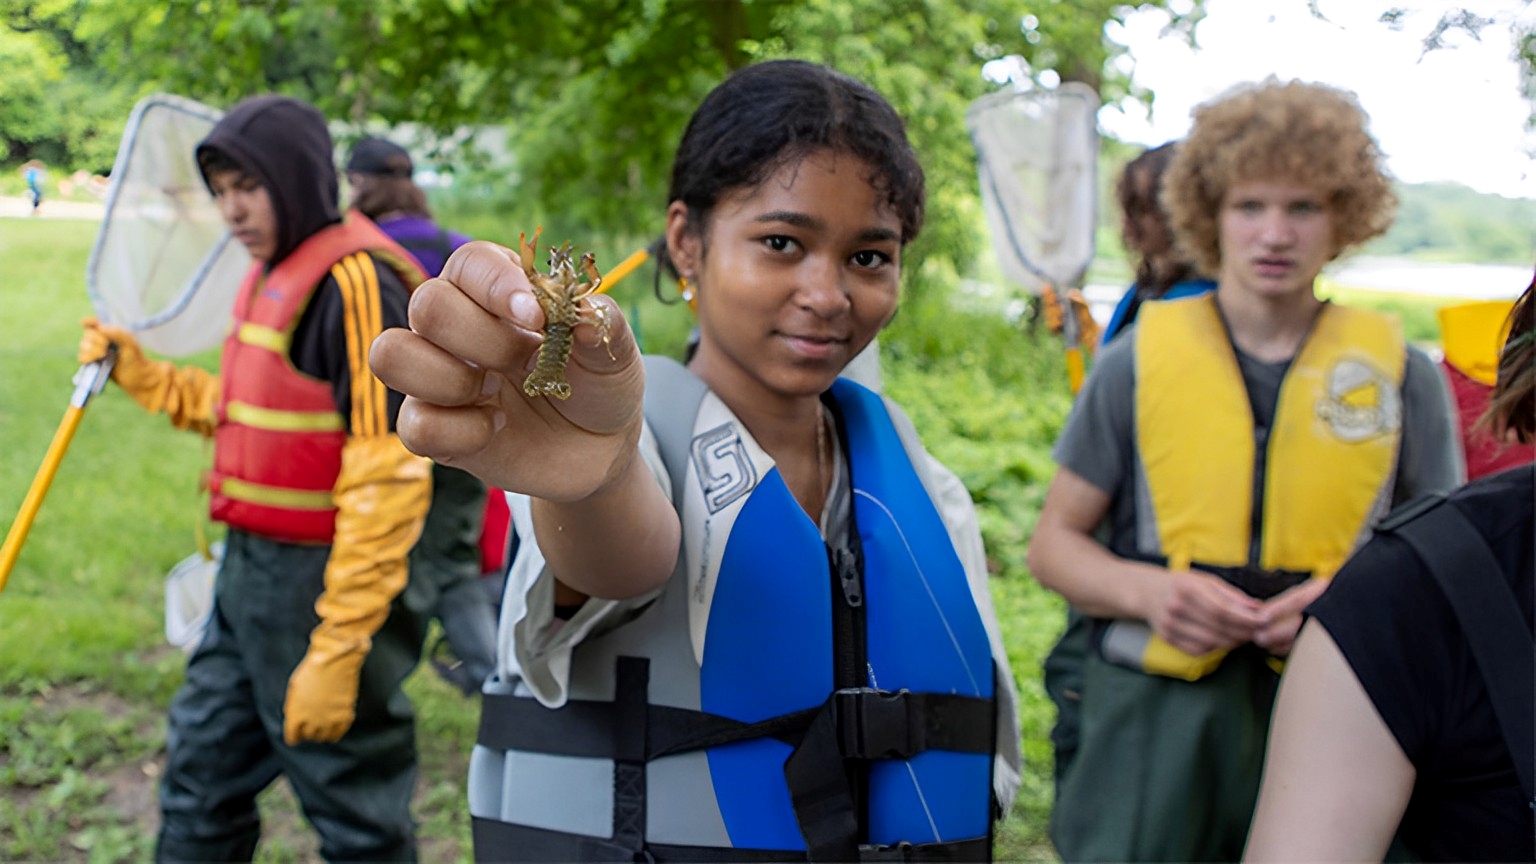 Grade 9 Khadeeja Fazal shows off a bug they found beneath a rock as part of a day filled with STEAM activities organized by McMaster and University of Waterloo.